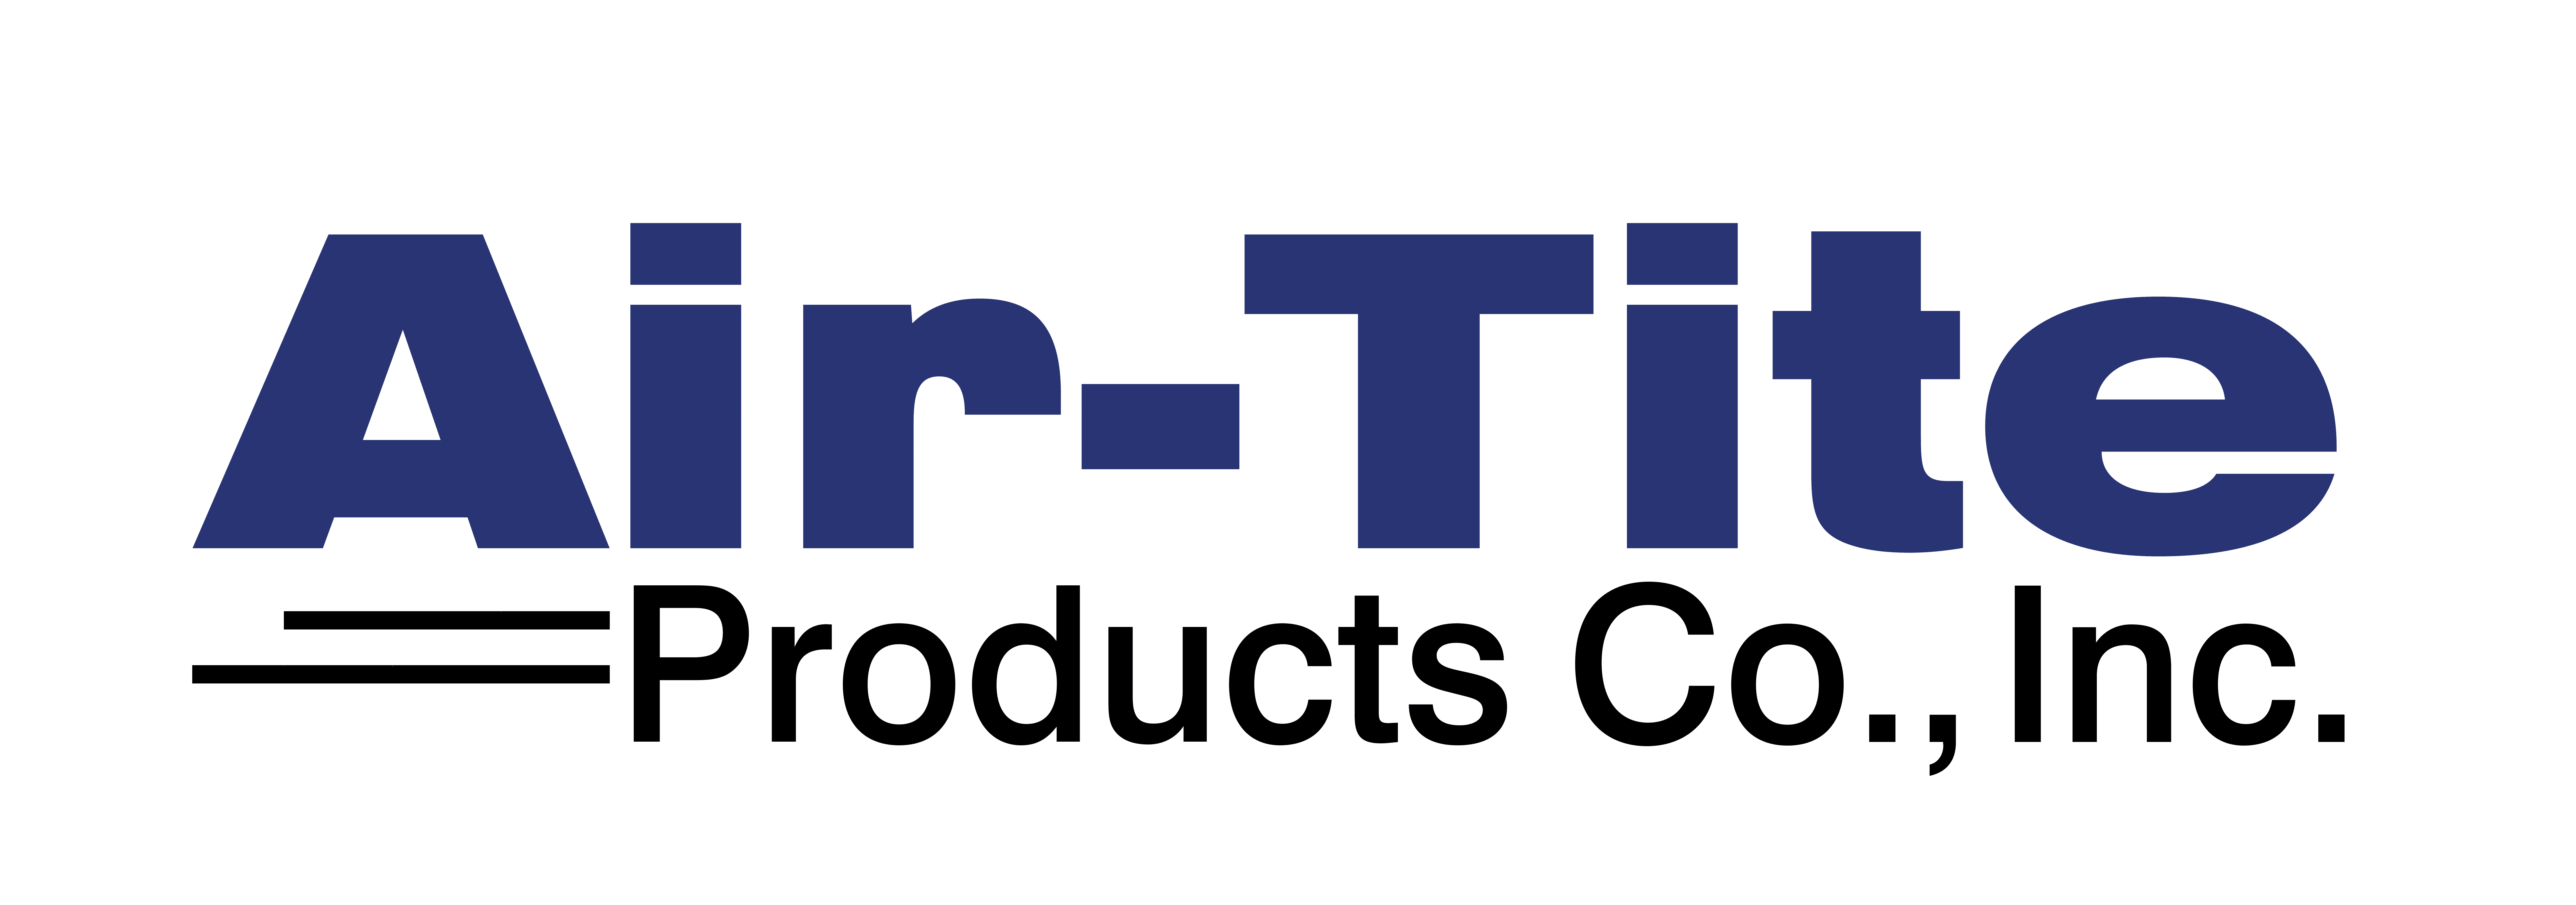 AirTite Products Company